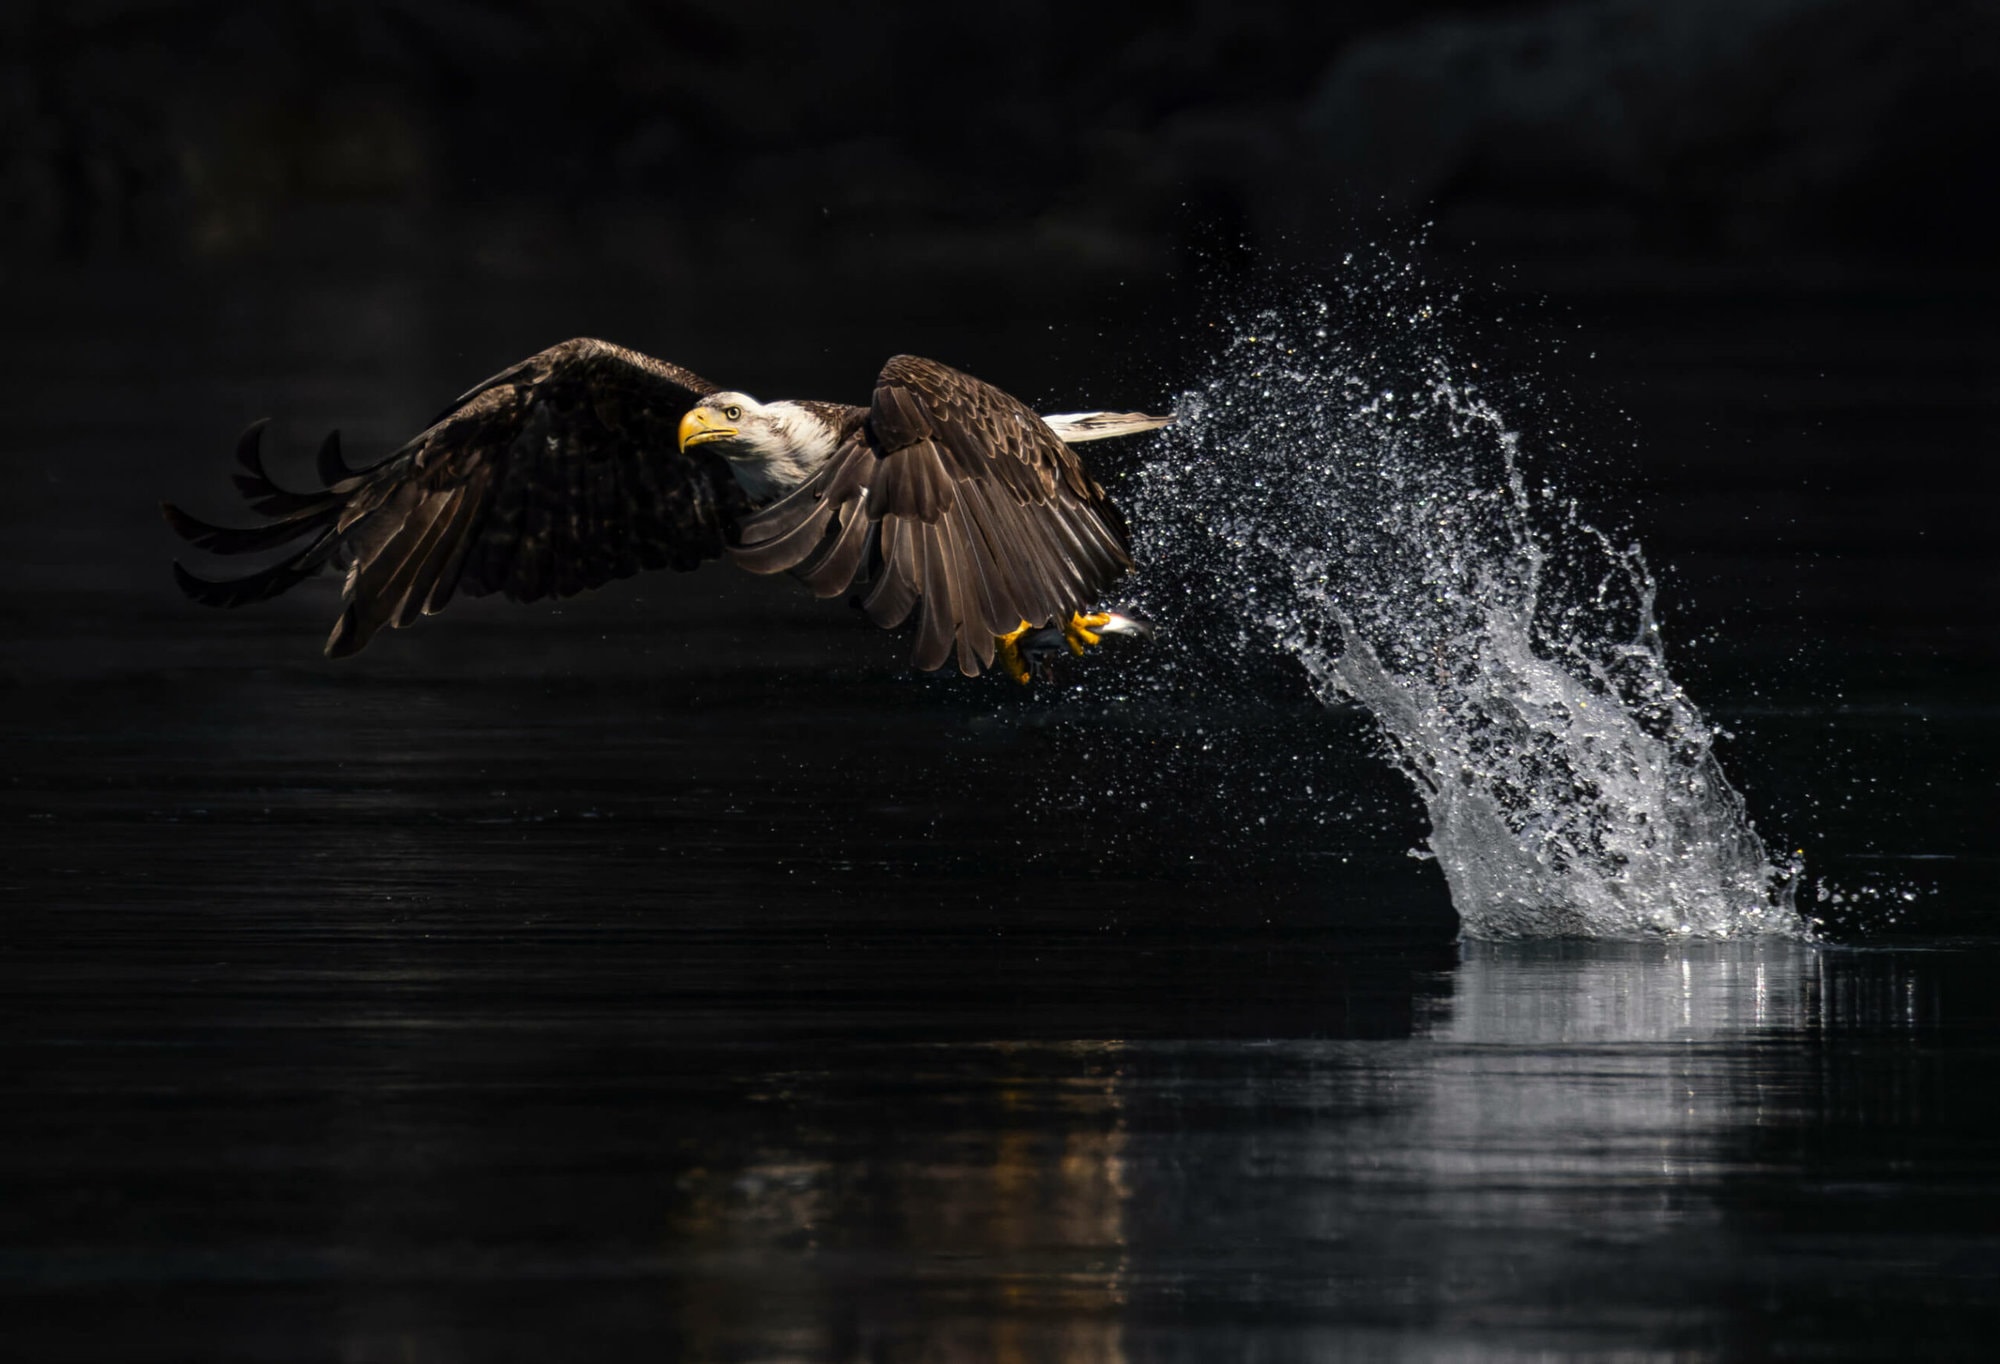 an eagle landing on the water with its wings spread